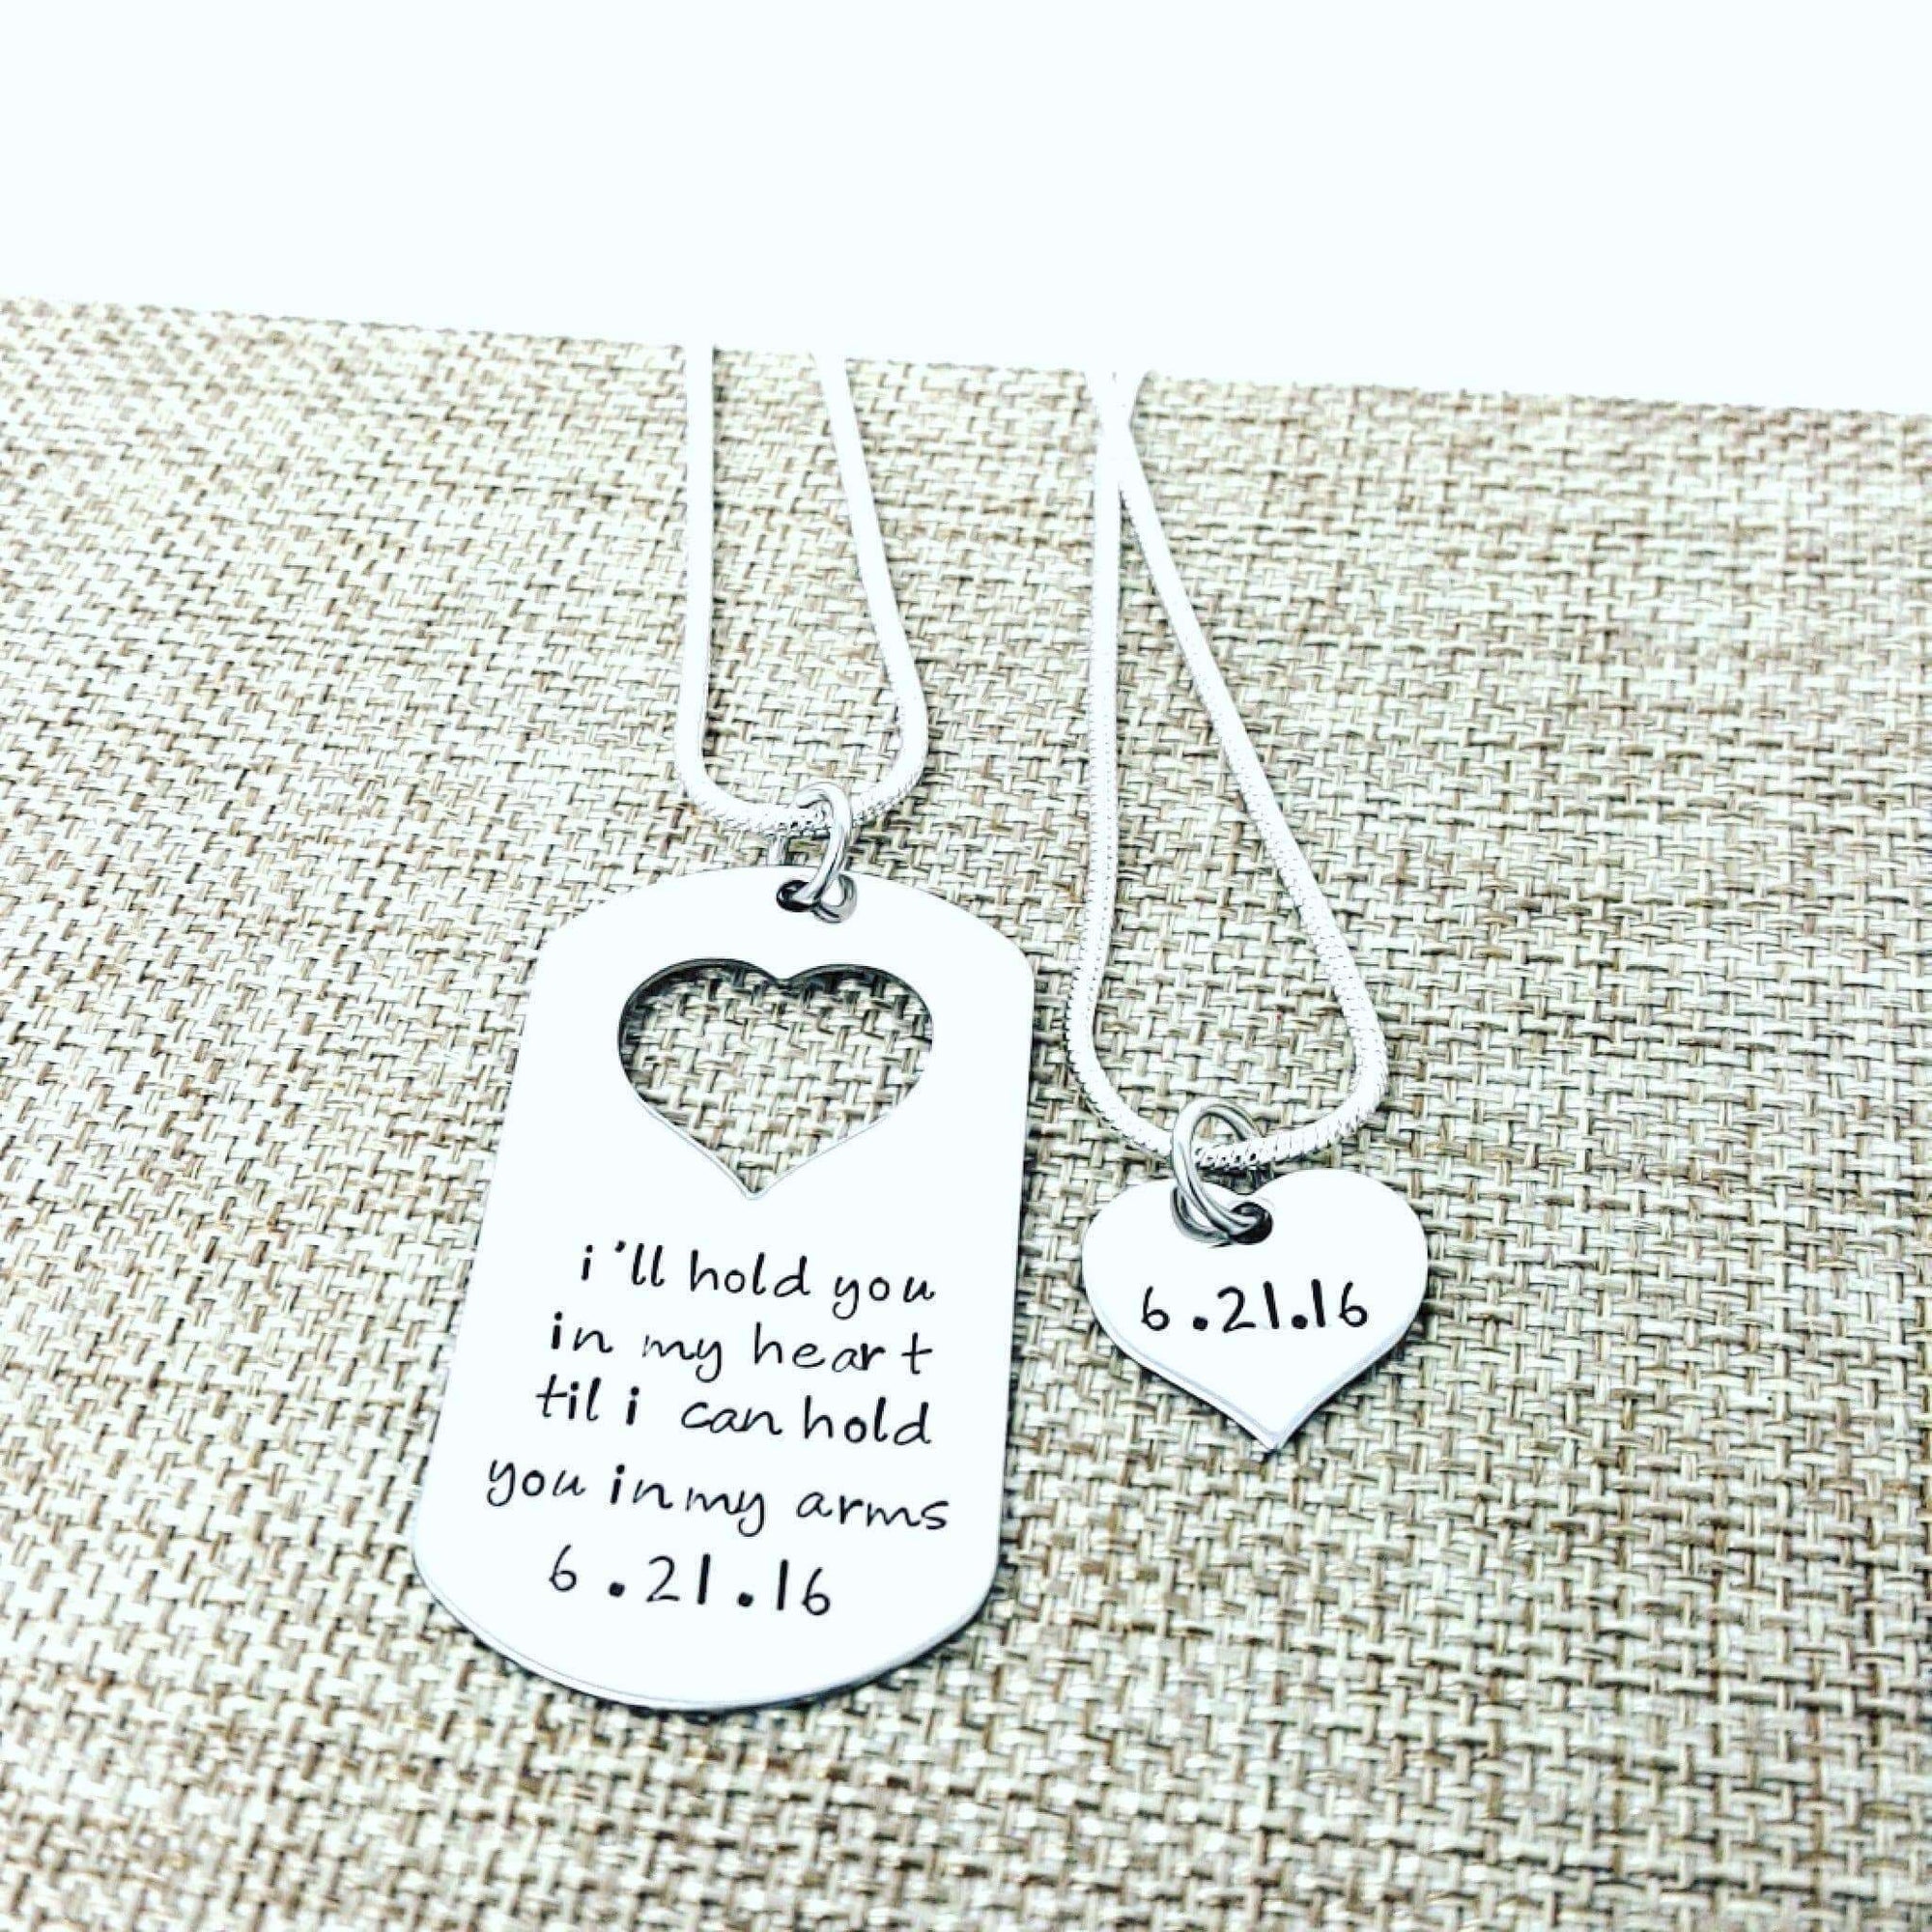 Long Distance, Deployment Gift, Couple's Necklace Set, Carry Your Heart, Heart Jewelry, Matching, Necklaces, HandmadeLoveStories, HandmadeLoveStories , [Handmade_Love_Stories], [Hand_Stamped_Jewelry], [Etsy_Stamped_Jewelry], [Etsy_Jewelry]